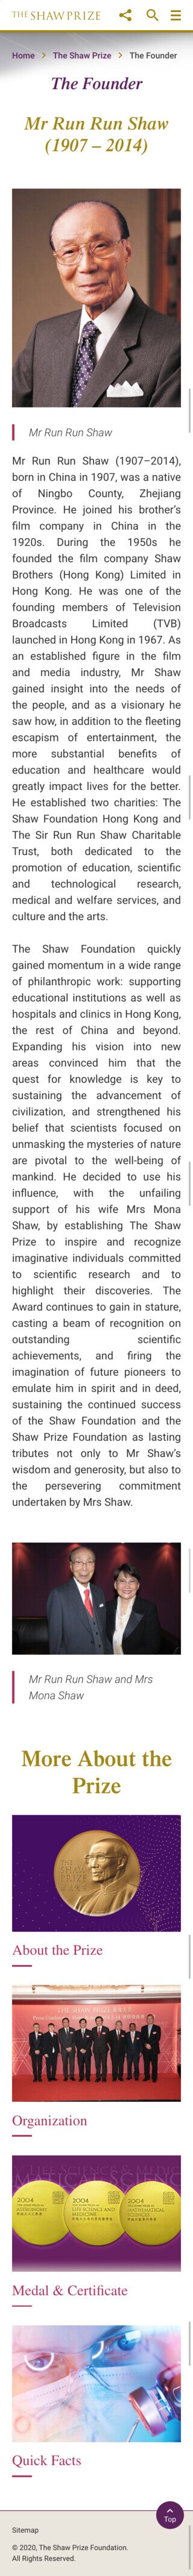 The Shaw Prize Mobile Founder